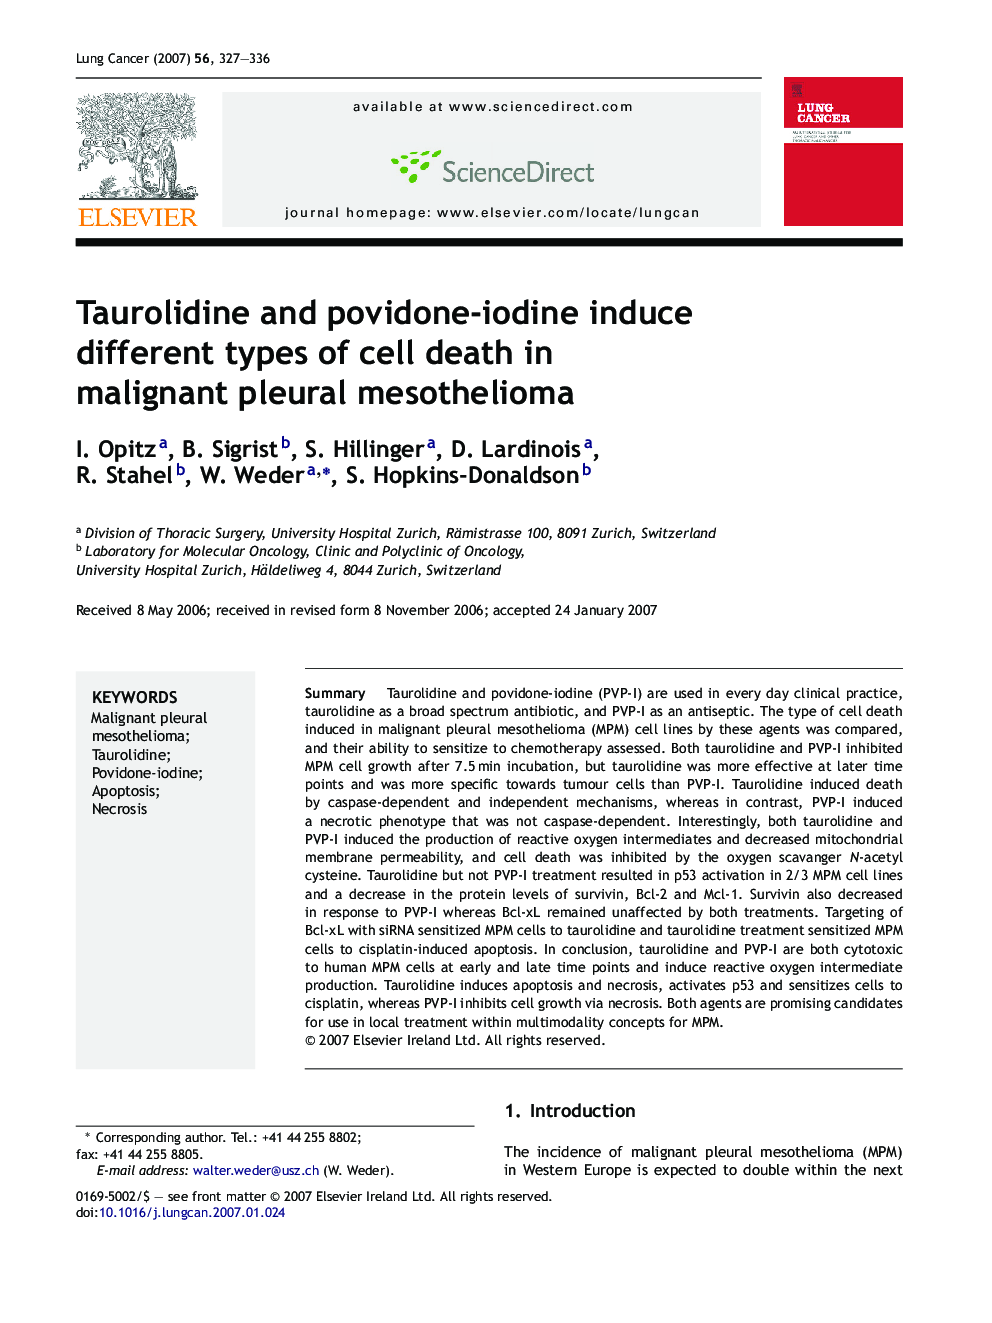 Taurolidine and povidone-iodine induce different types of cell death in malignant pleural mesothelioma